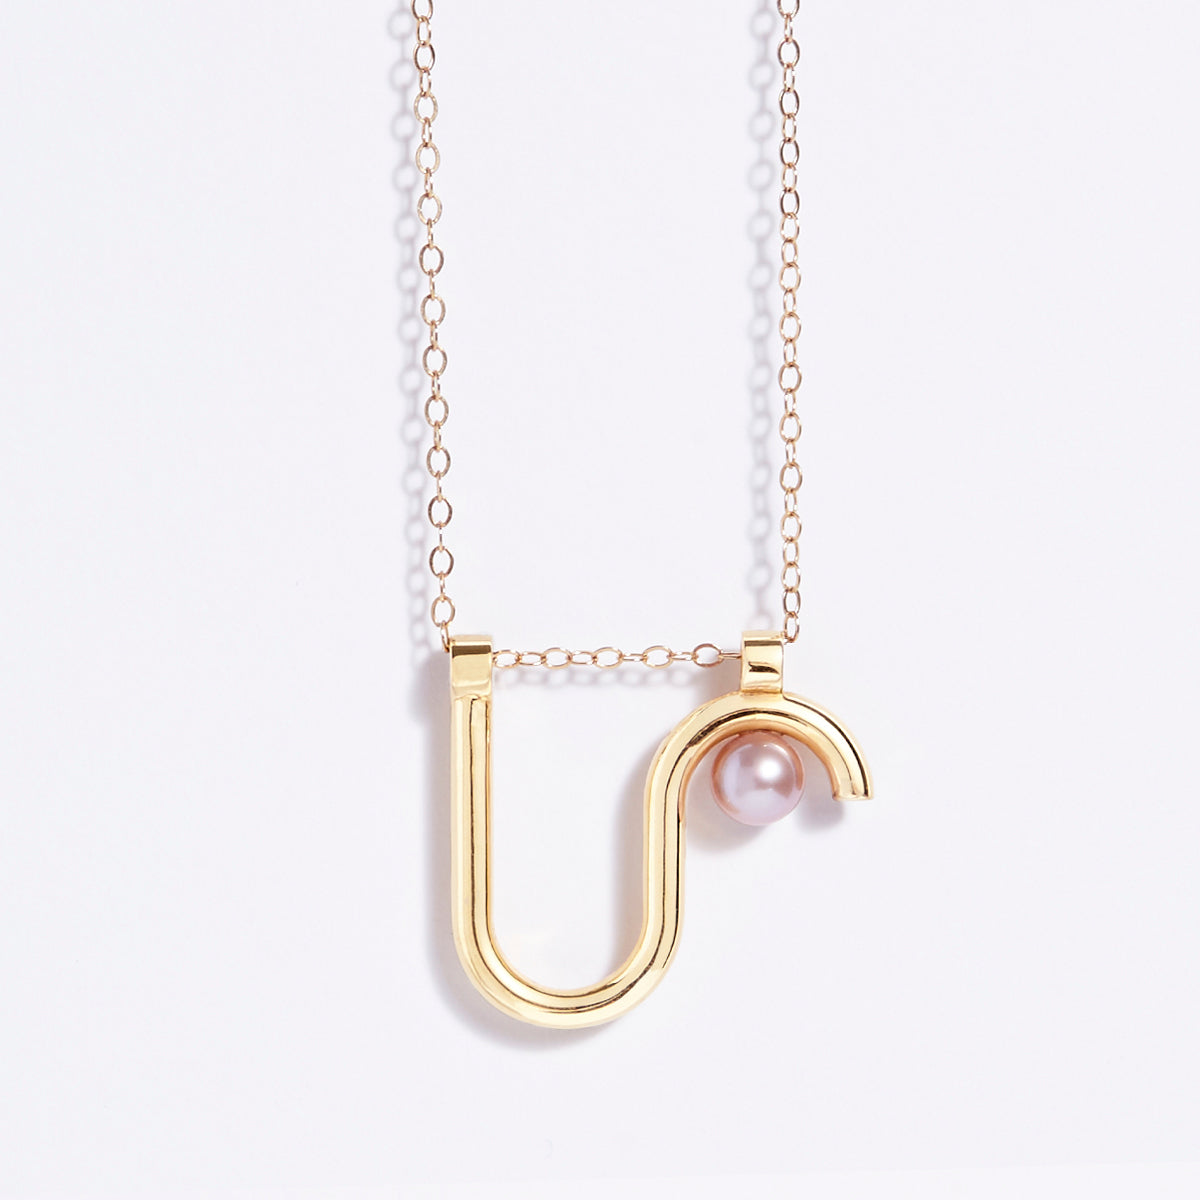 Arco necklace- 14k gold